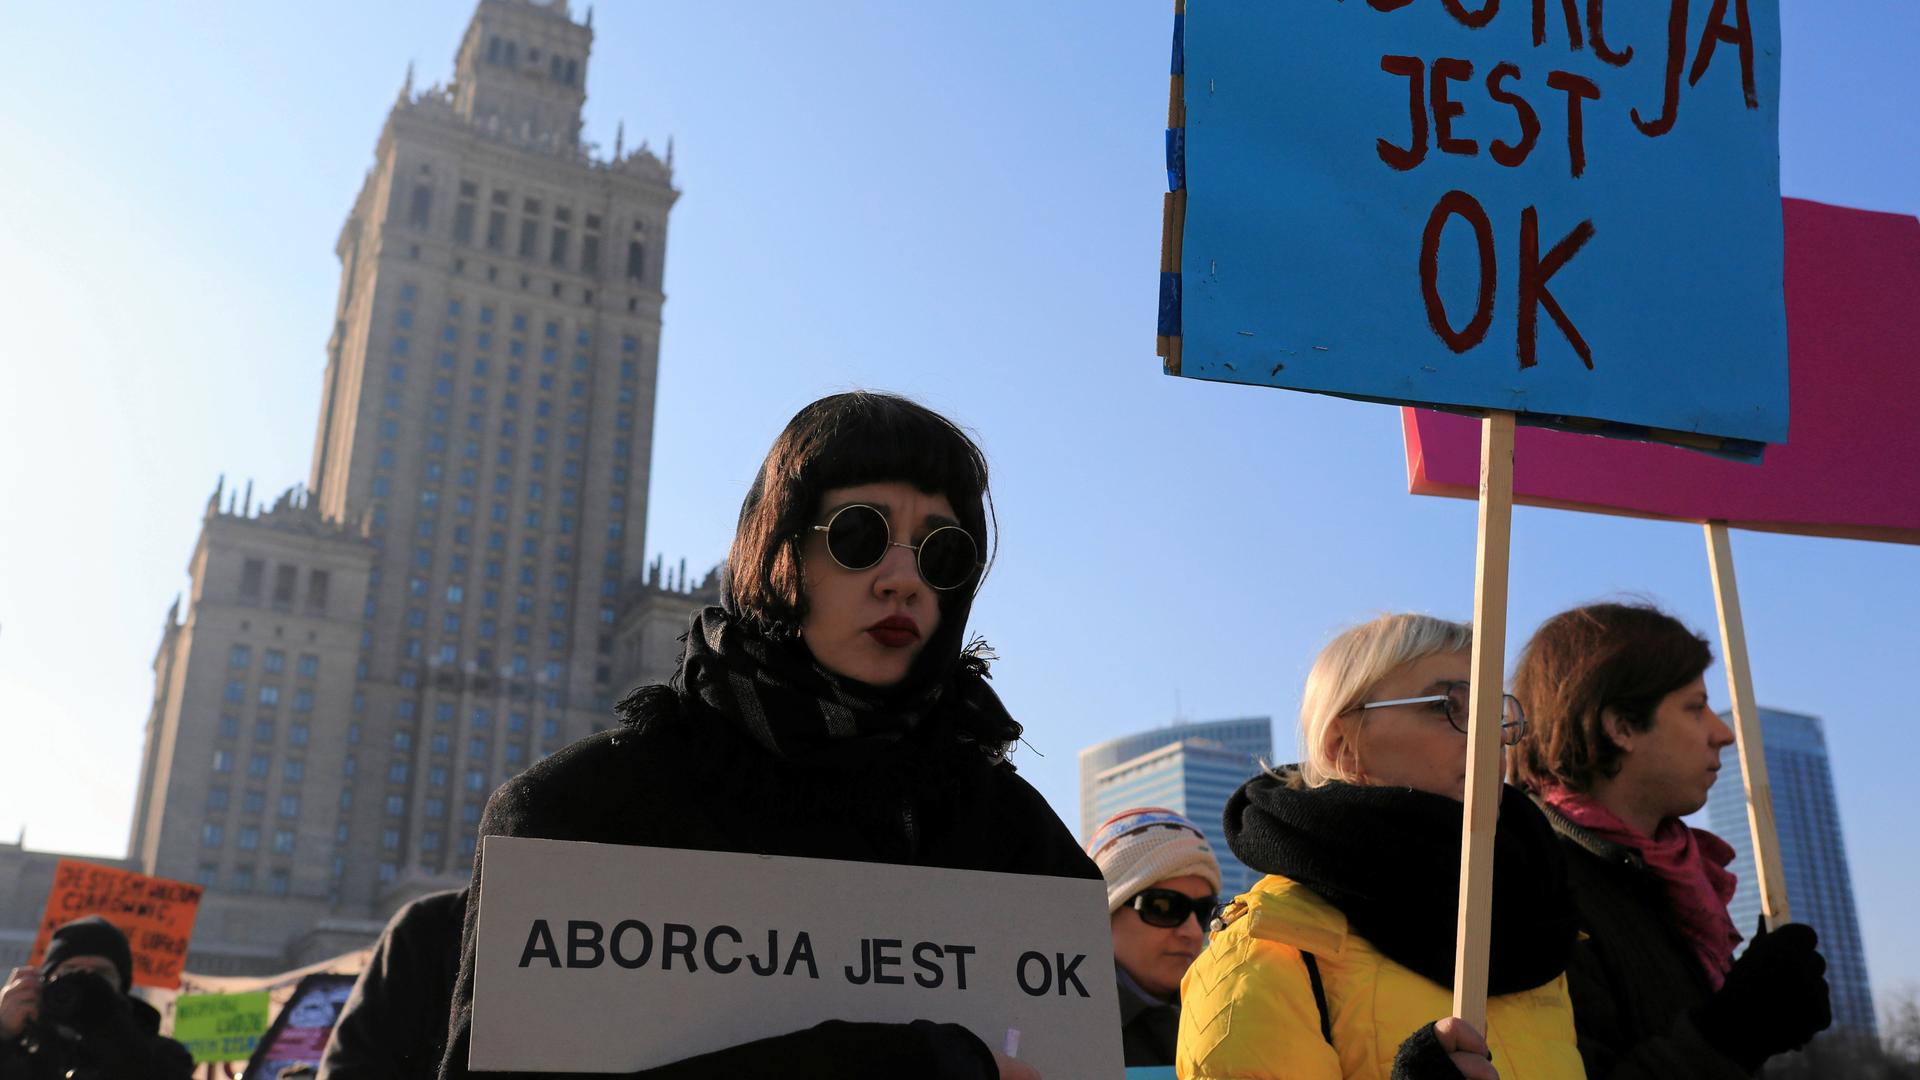 woman wearing sunglasses holds sign that says "abortion is ok"